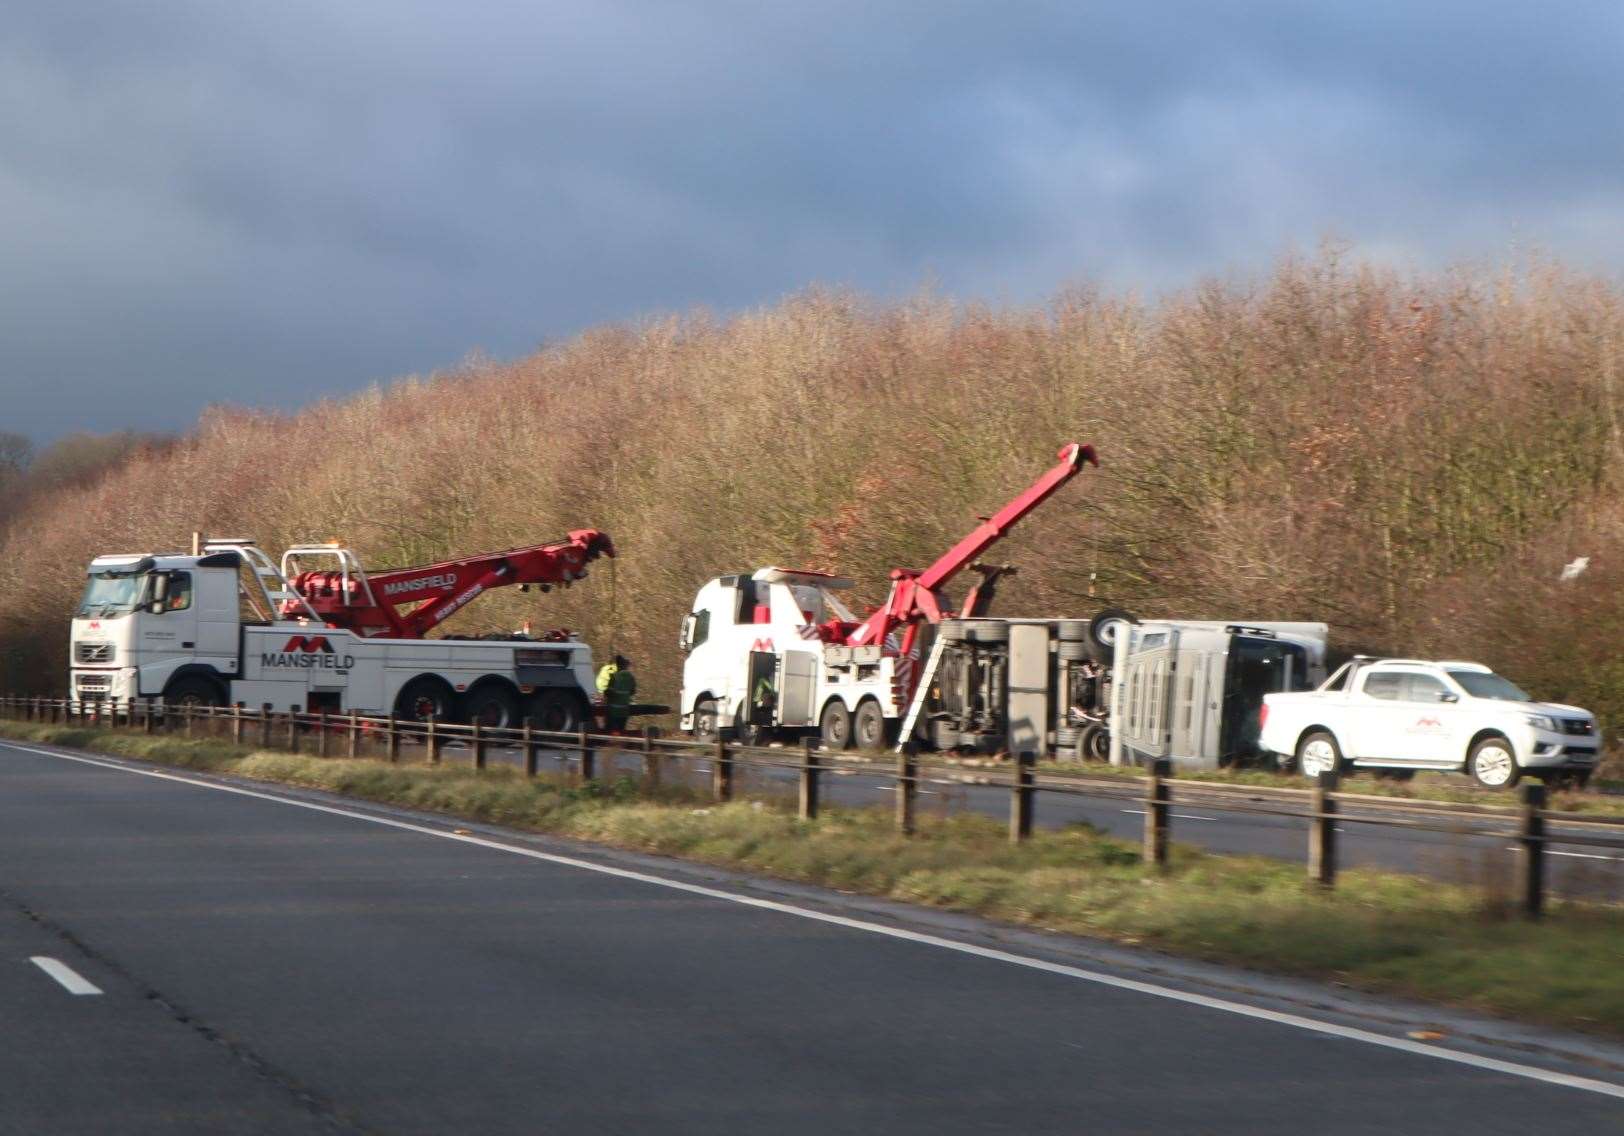 Two recovery trucks attempt to right an overturned lorry on the Sheppey-bound A249 at Bobbing